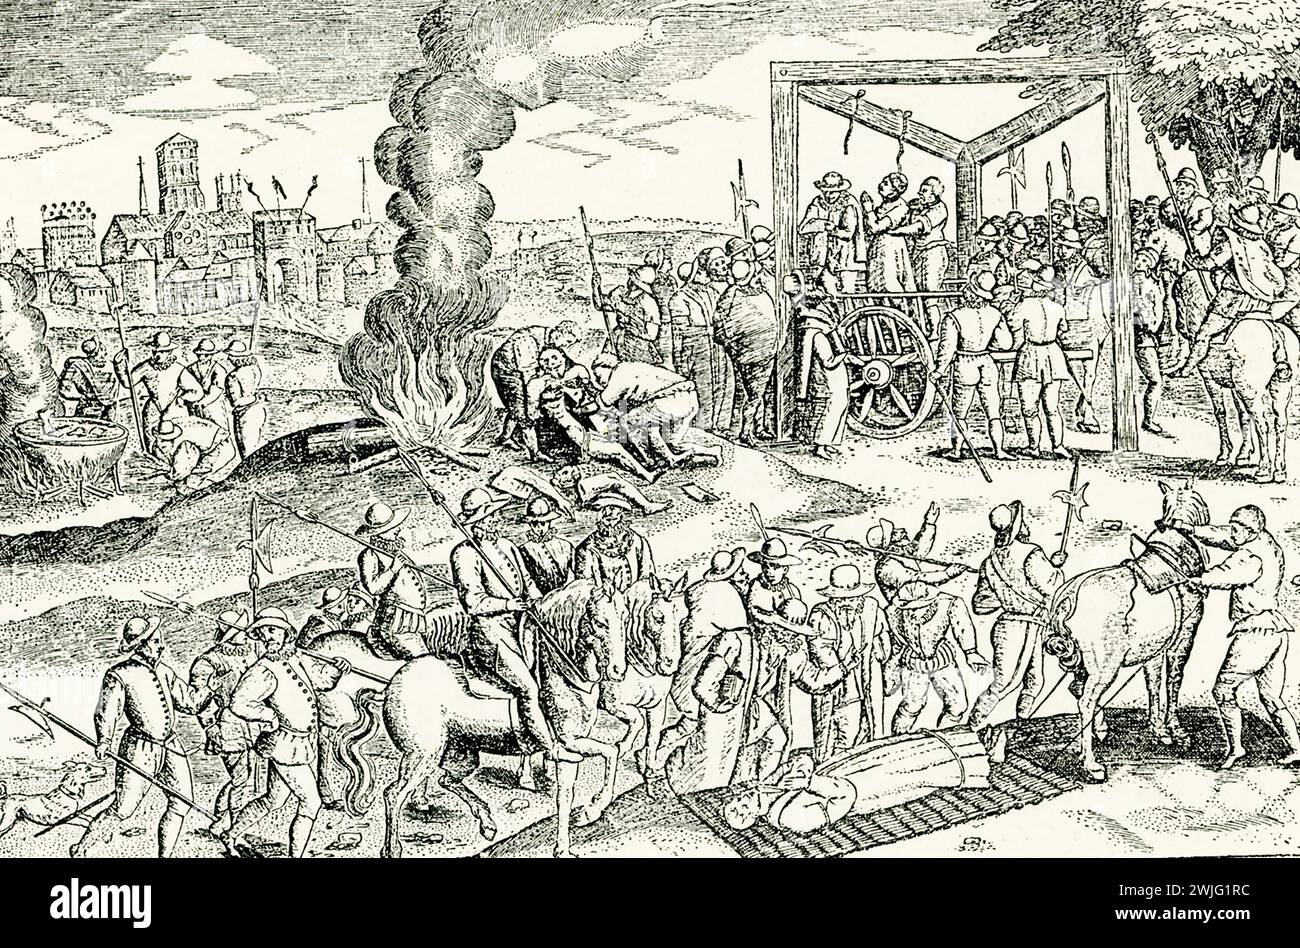 This image shows the execution of reformers in England in the time of Mary the Catholic (1516-1587). The engraving is anonymous but dates to the time period. Mary was the only daughter of Henry VIII and his first wife, Catherine of Aragon. Stock Photo